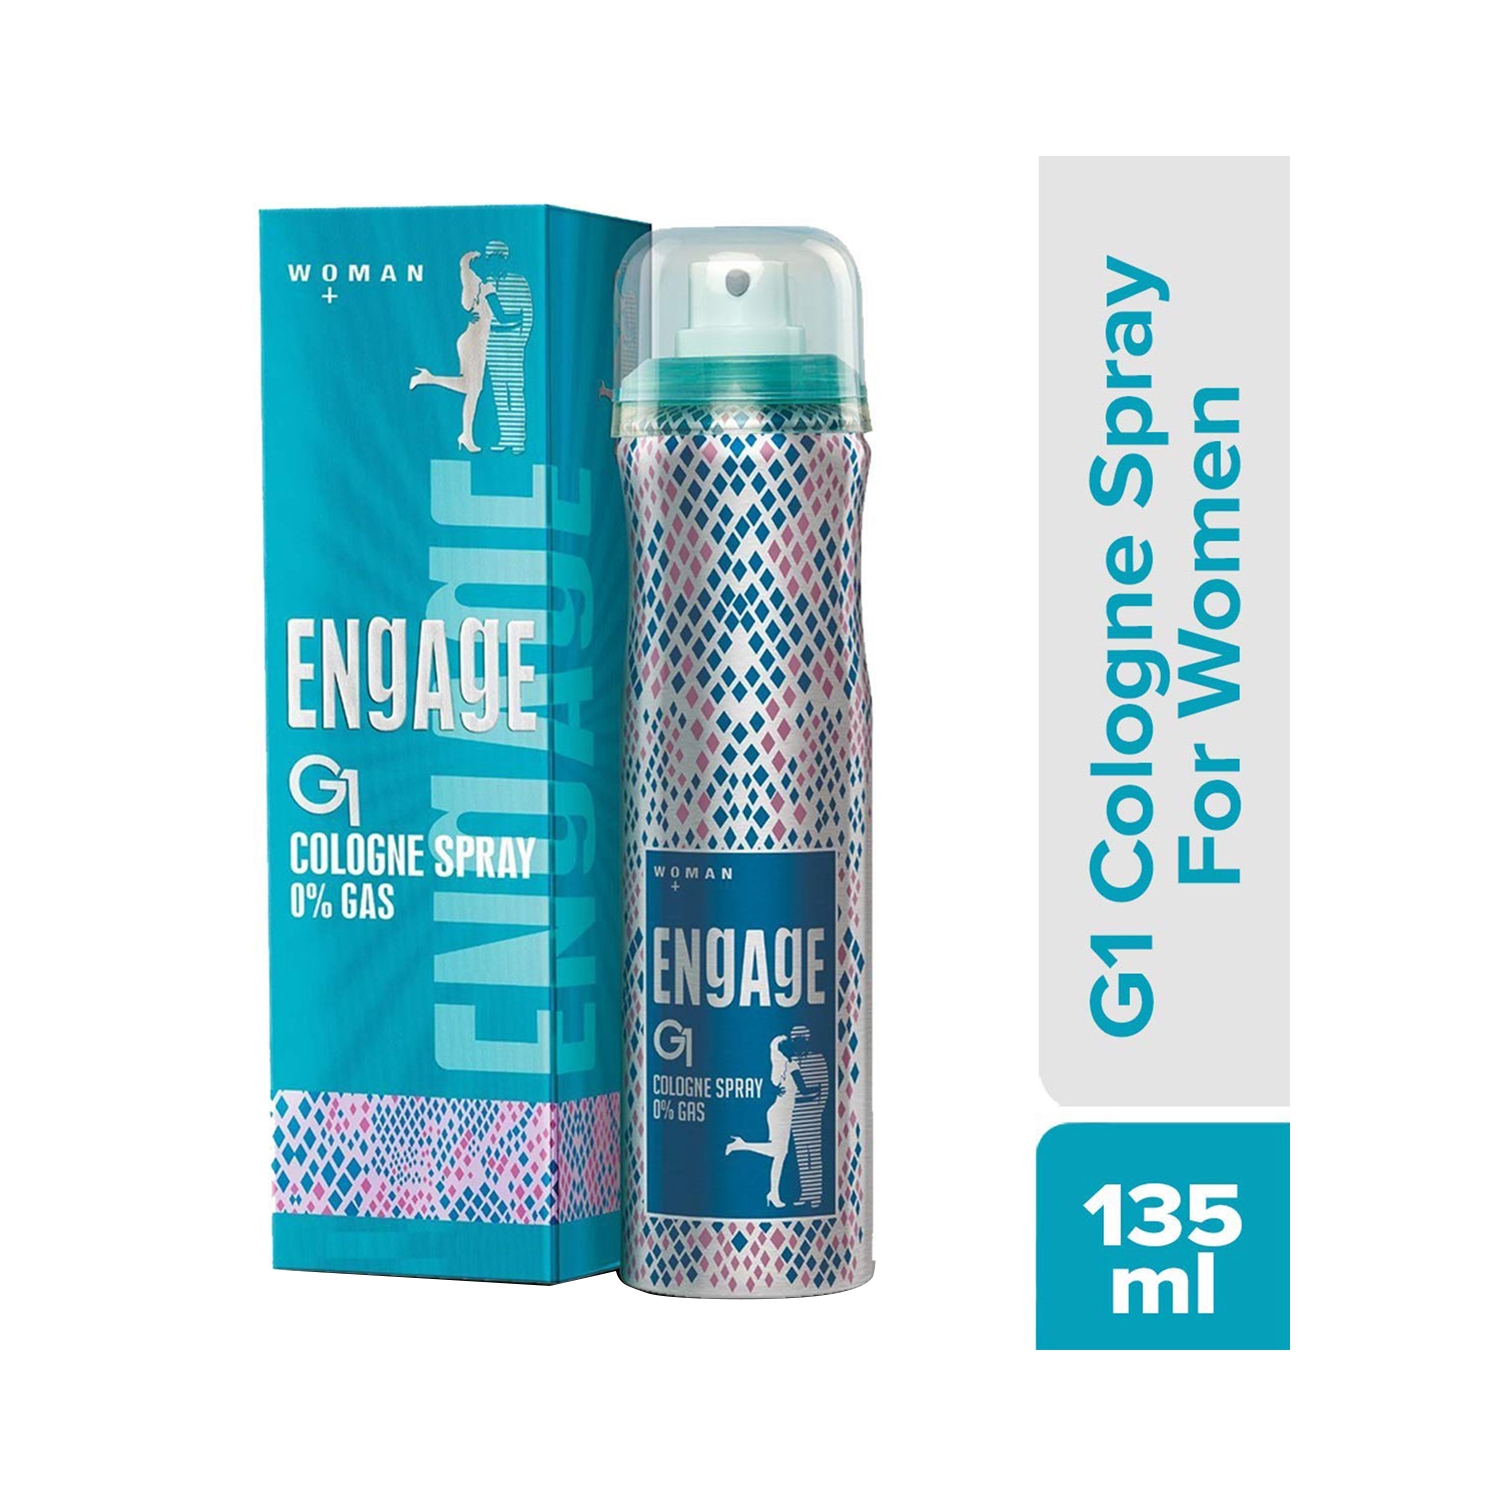 Engage | Engage G1 Cologne Spray For Women (135ml)